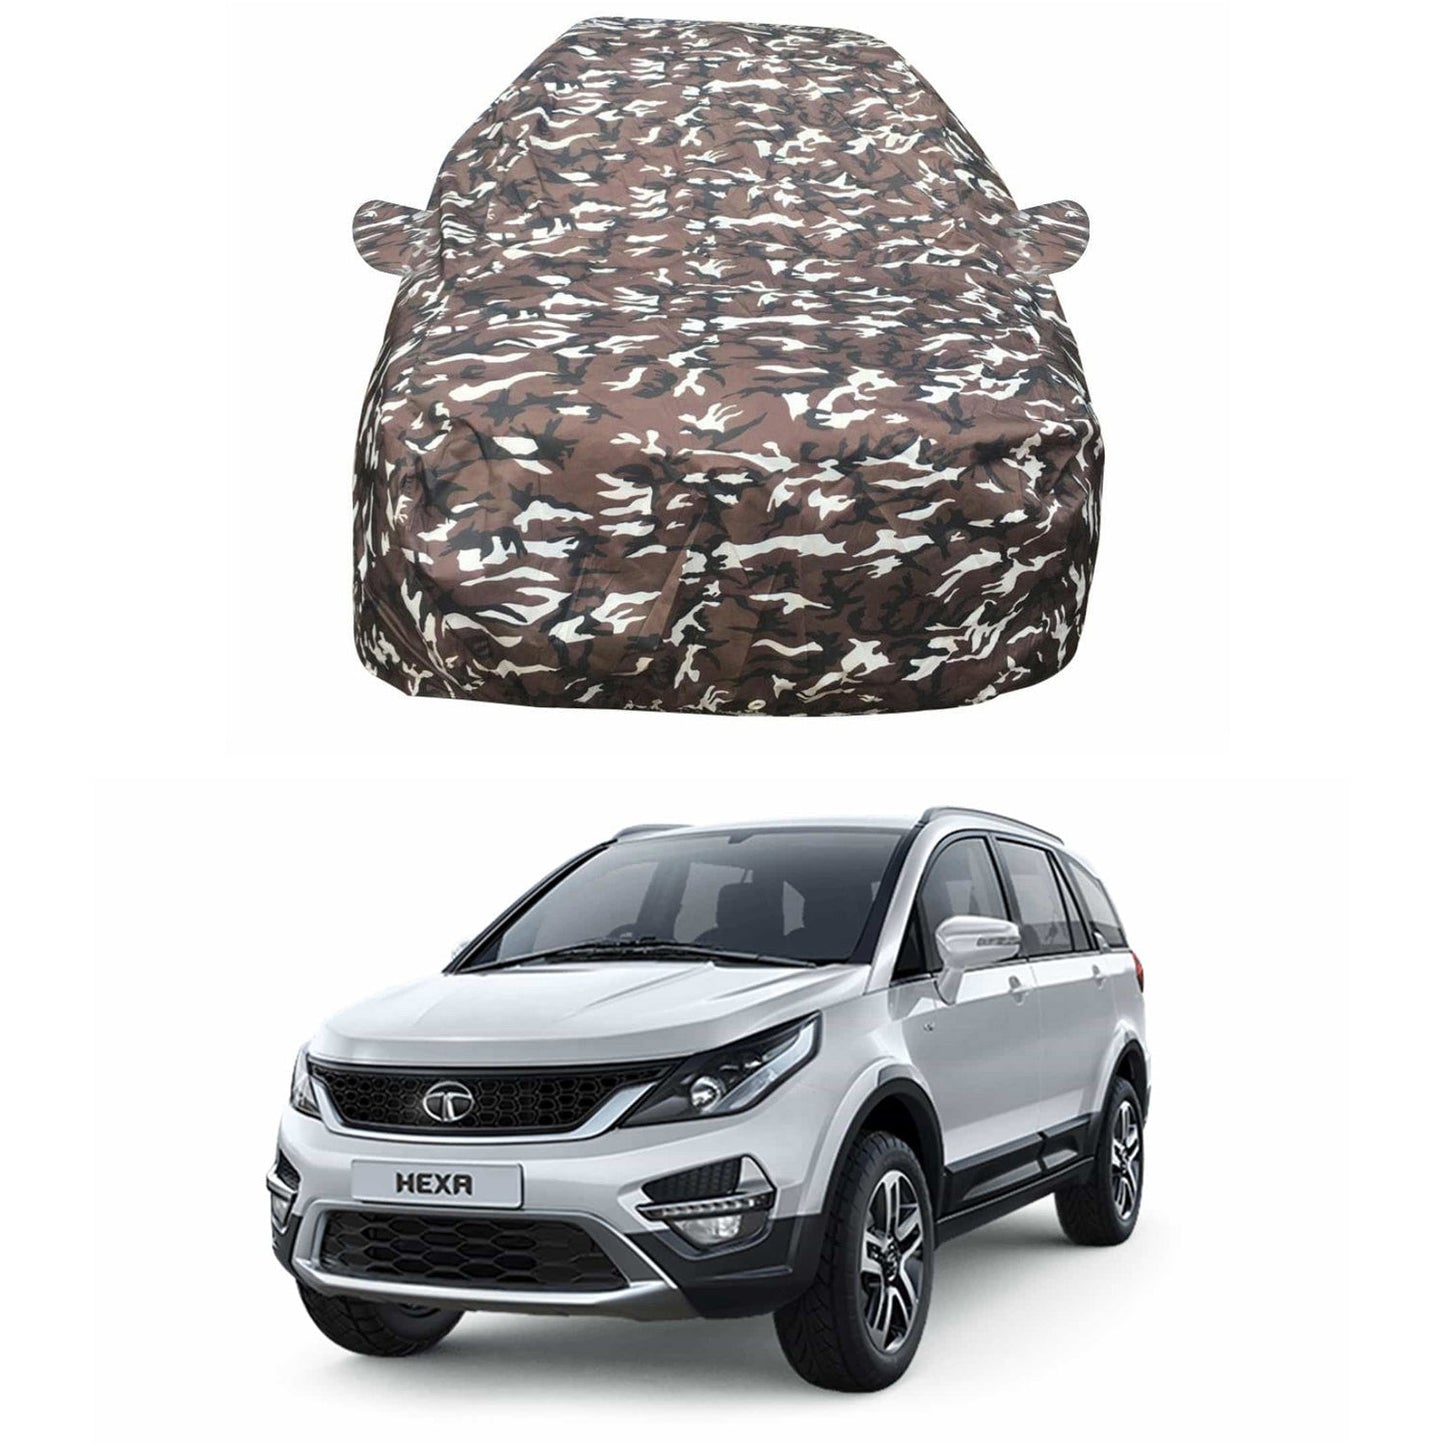 Oshotto Ranger Design Made of 100% Waterproof Fabric Car Body Cover with Mirror Pockets For Tata Hexa